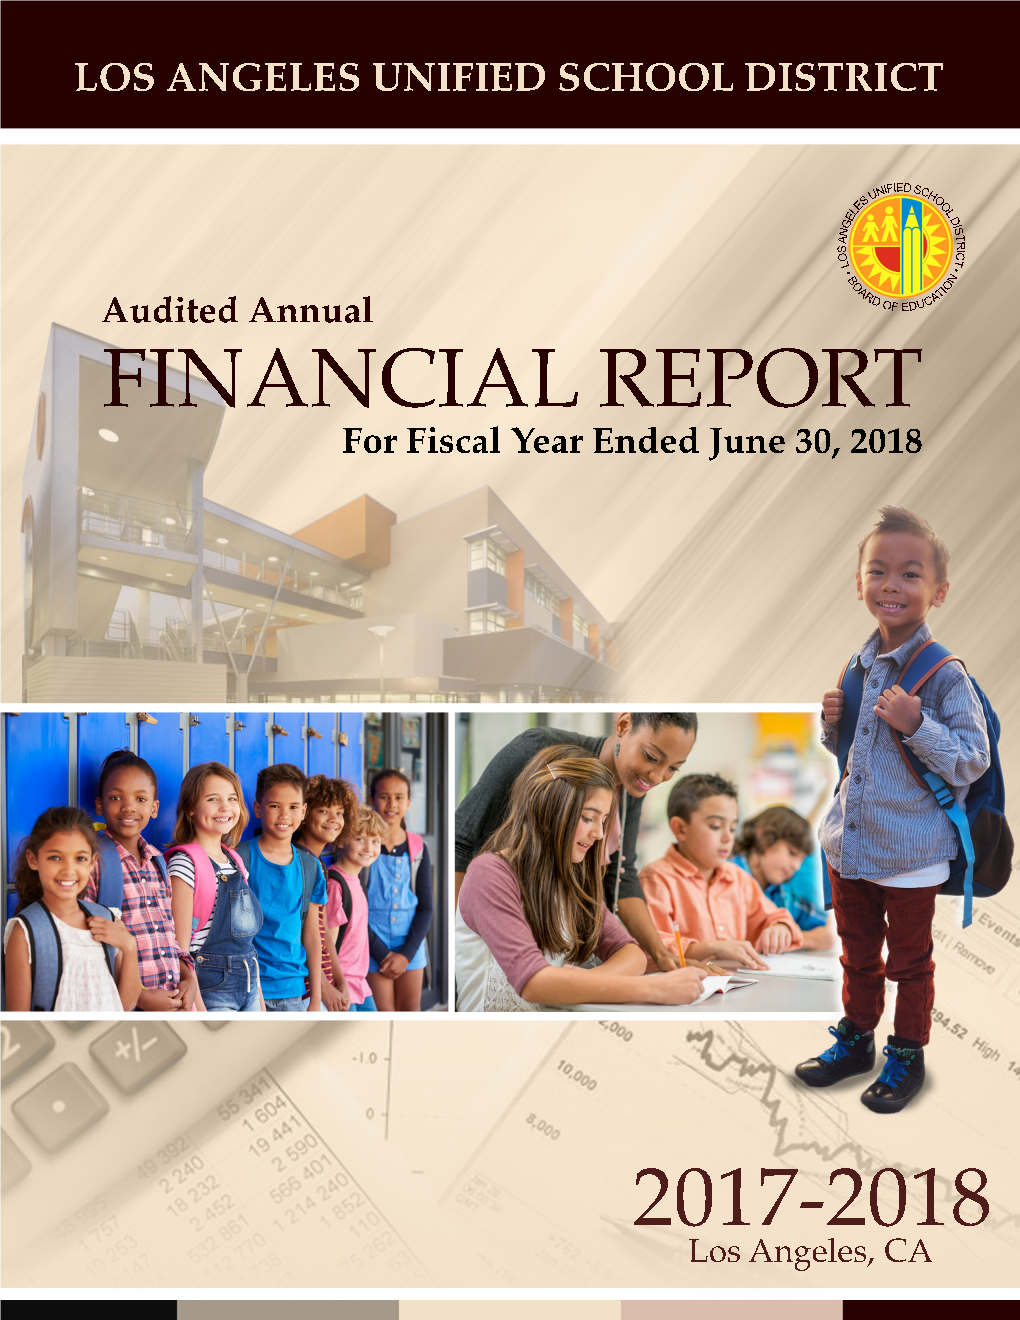 Audited Annual Financial Report Fiscal Year Ended June 30, 2018